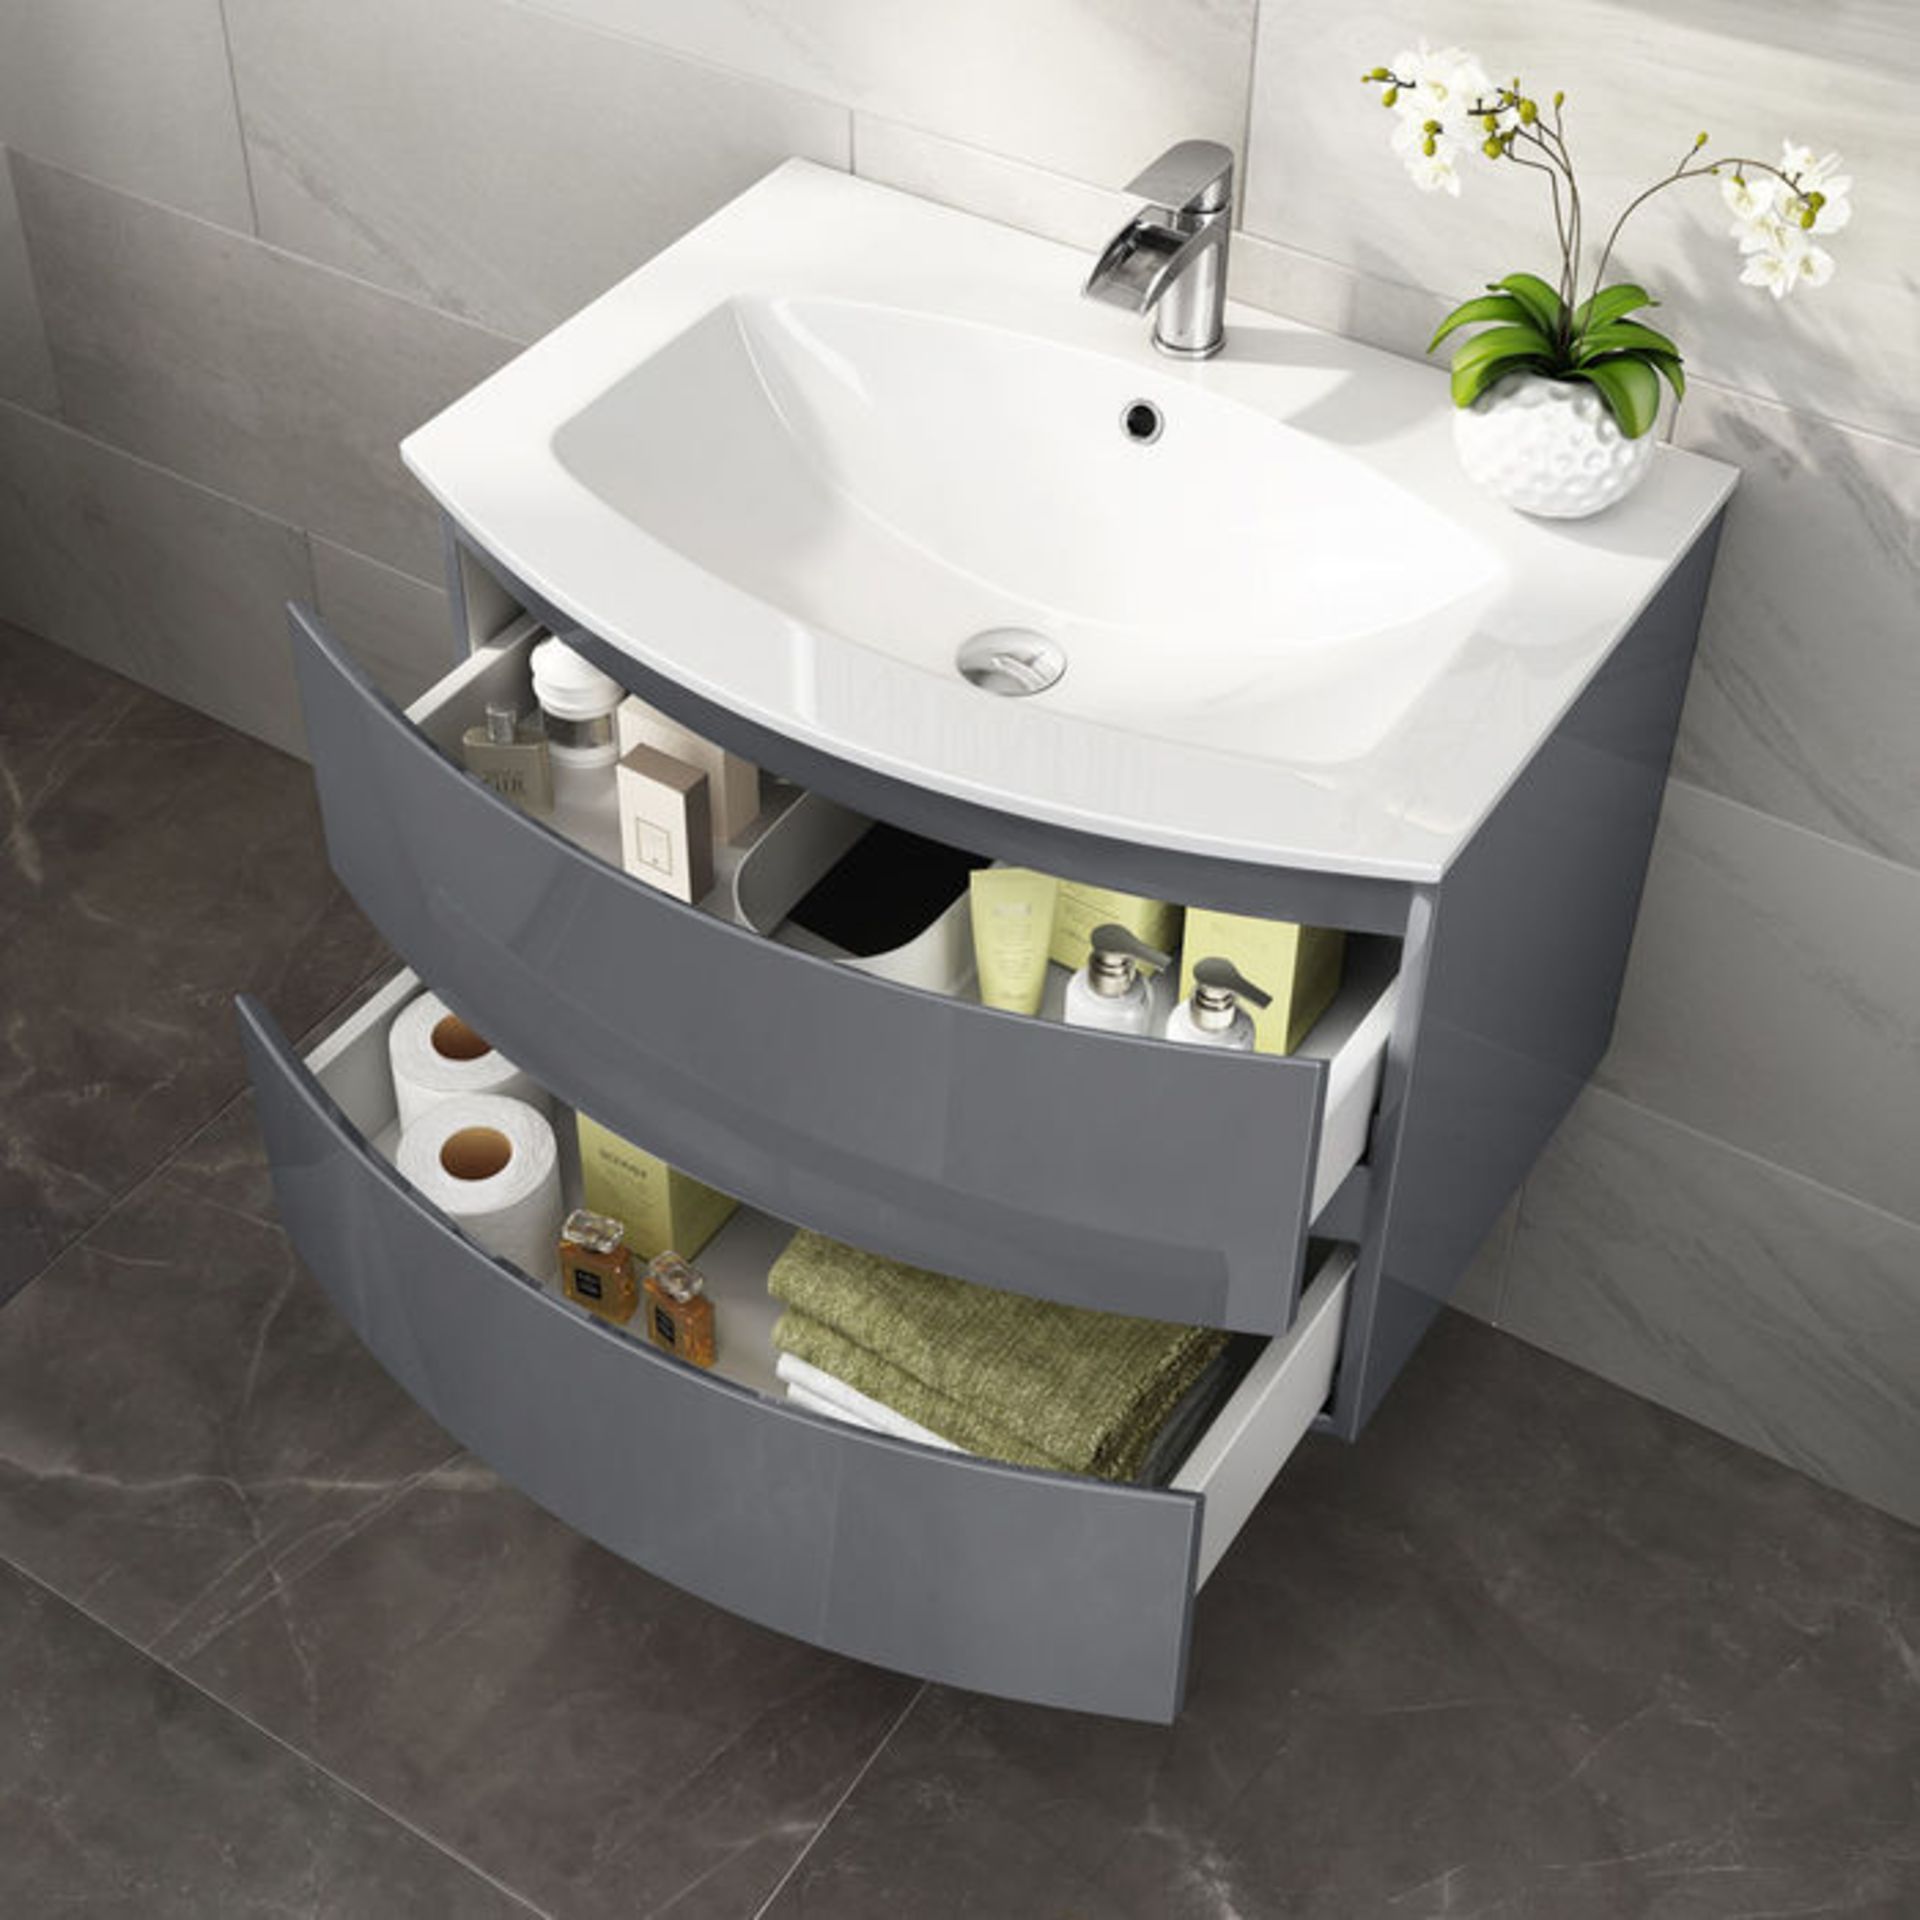 NEW & BOXED 700mm Amelie Gloss Grey Curved Vanity Unit - Wall Hung. RRP £899.99.Comes complete... - Image 2 of 2